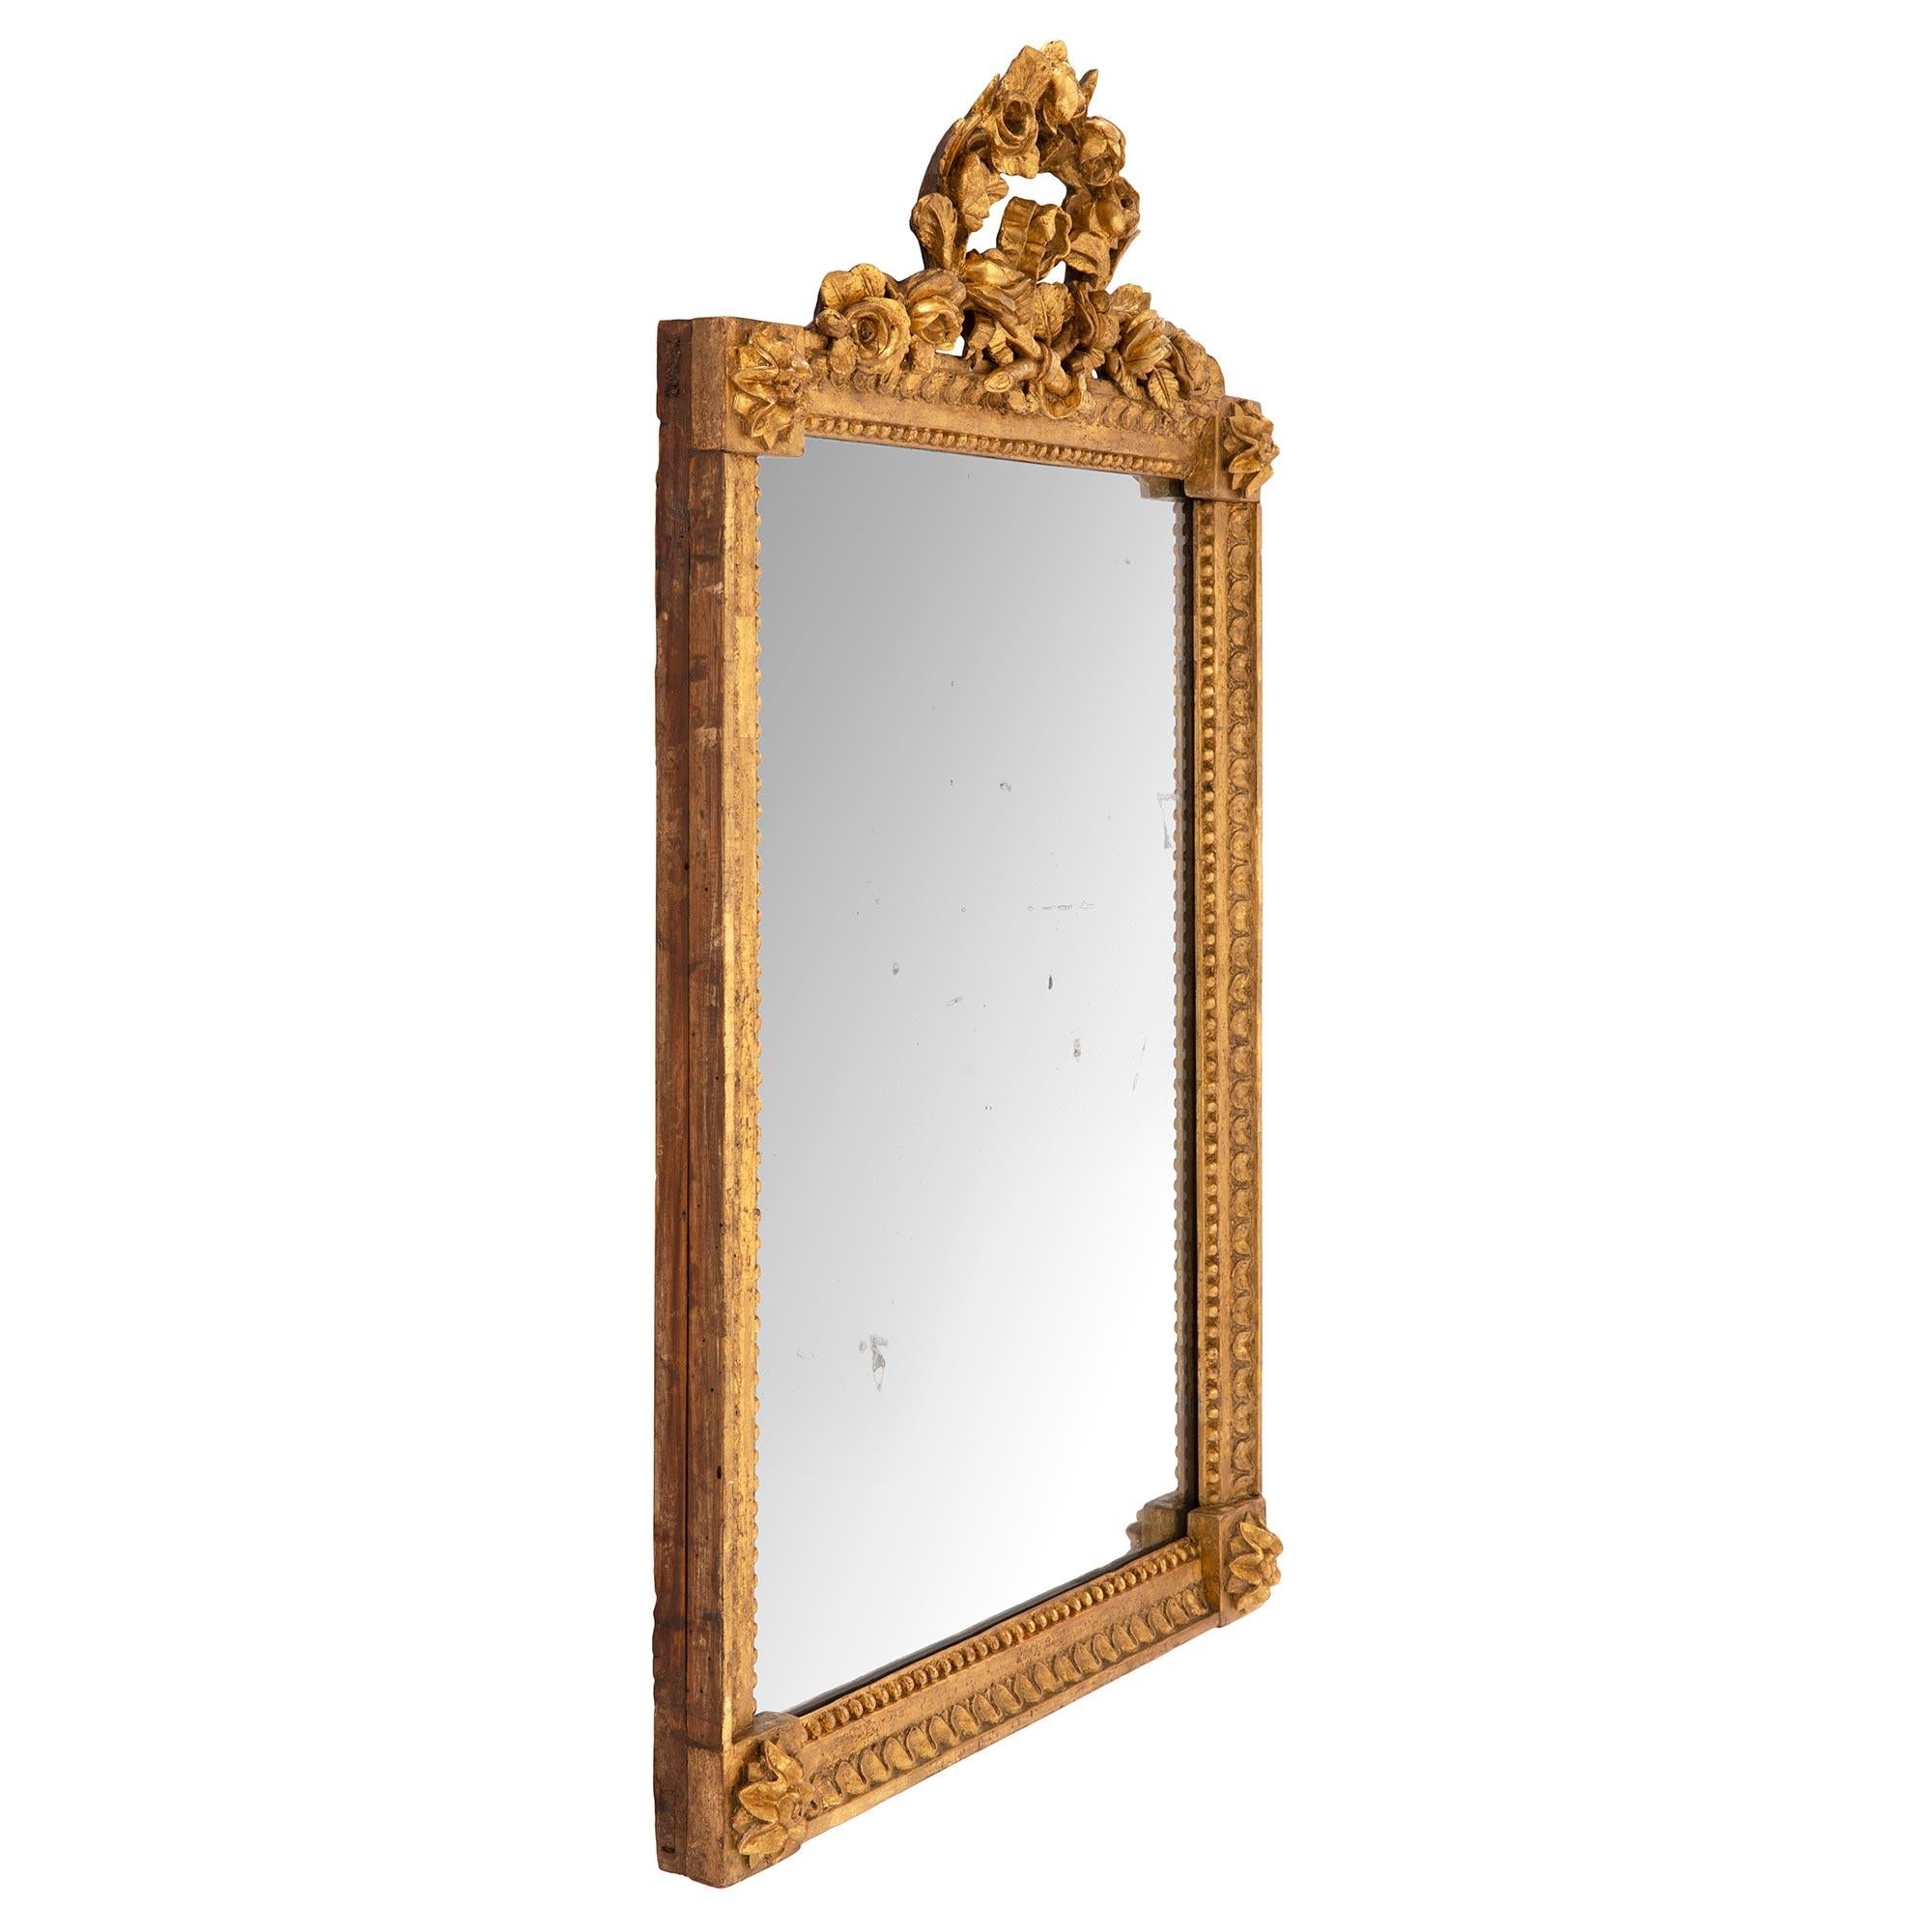 A charming French 19th century Louis XVI st. giltwood mirror. The mirror retains its original mirror plate set within a straight frame with a lovely beaded and foliate wrap around band with delicate block rosettes at each corner. The beautiful top